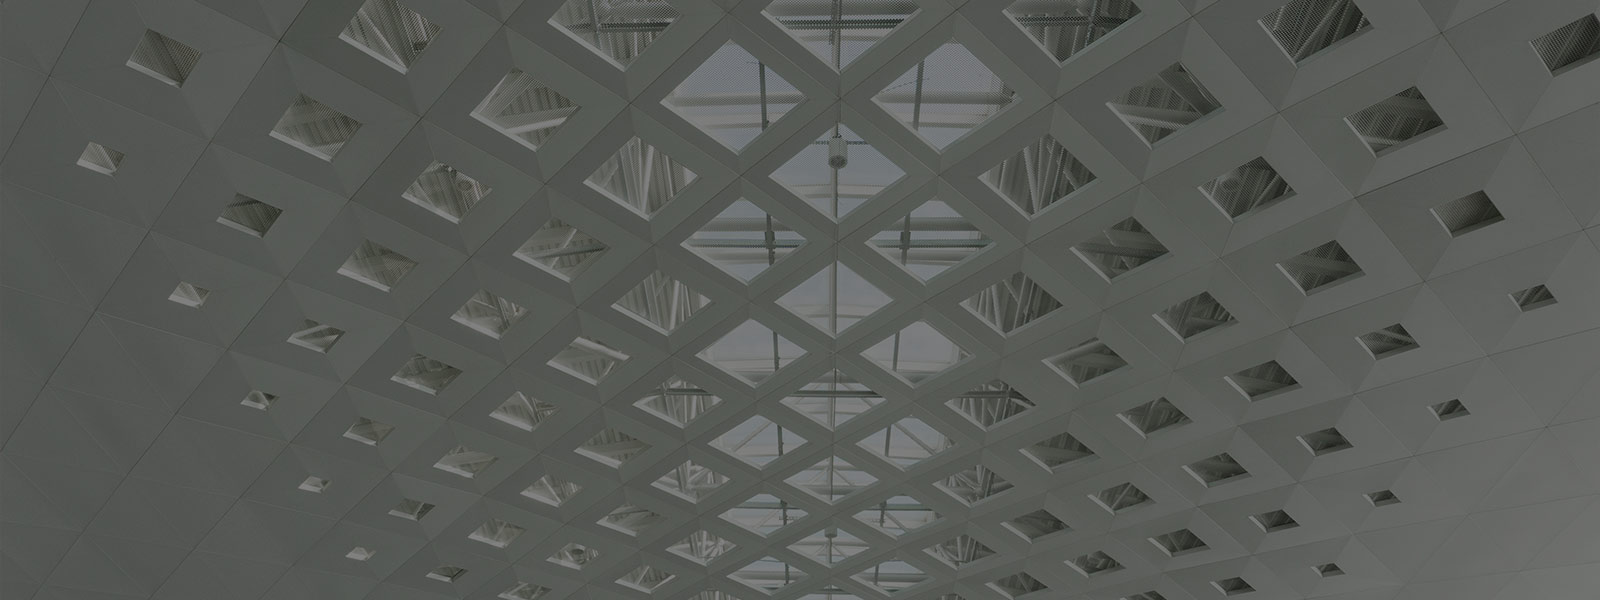 Metal Roof Structure Of Office Building Ceiling